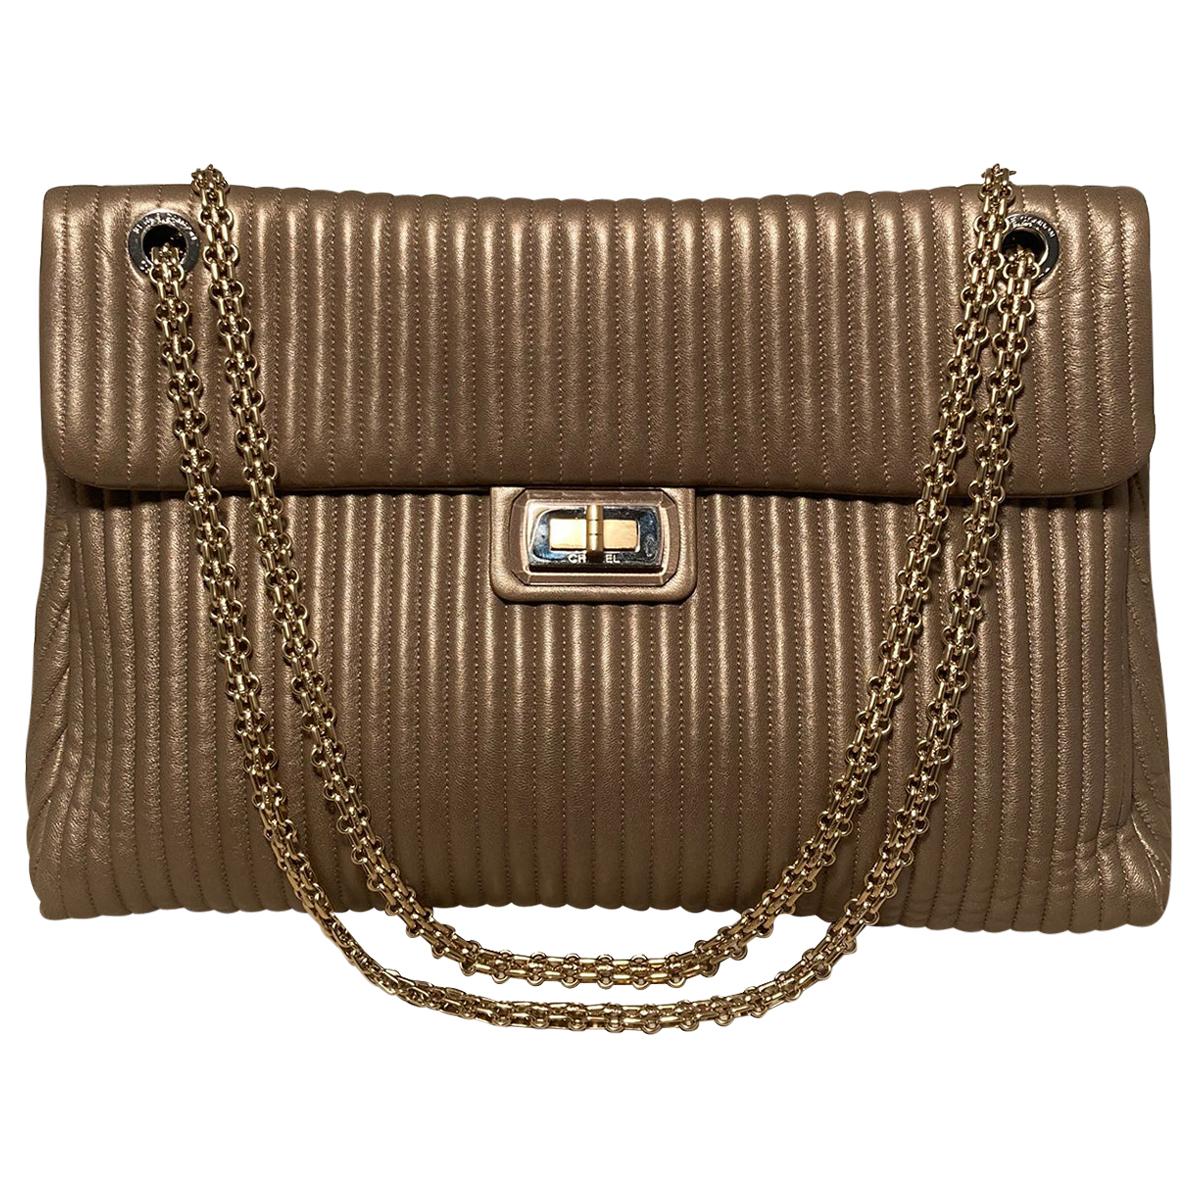 Chanel Vertical Stripe Quilted Reissue Classic Flap Shoulder Bag